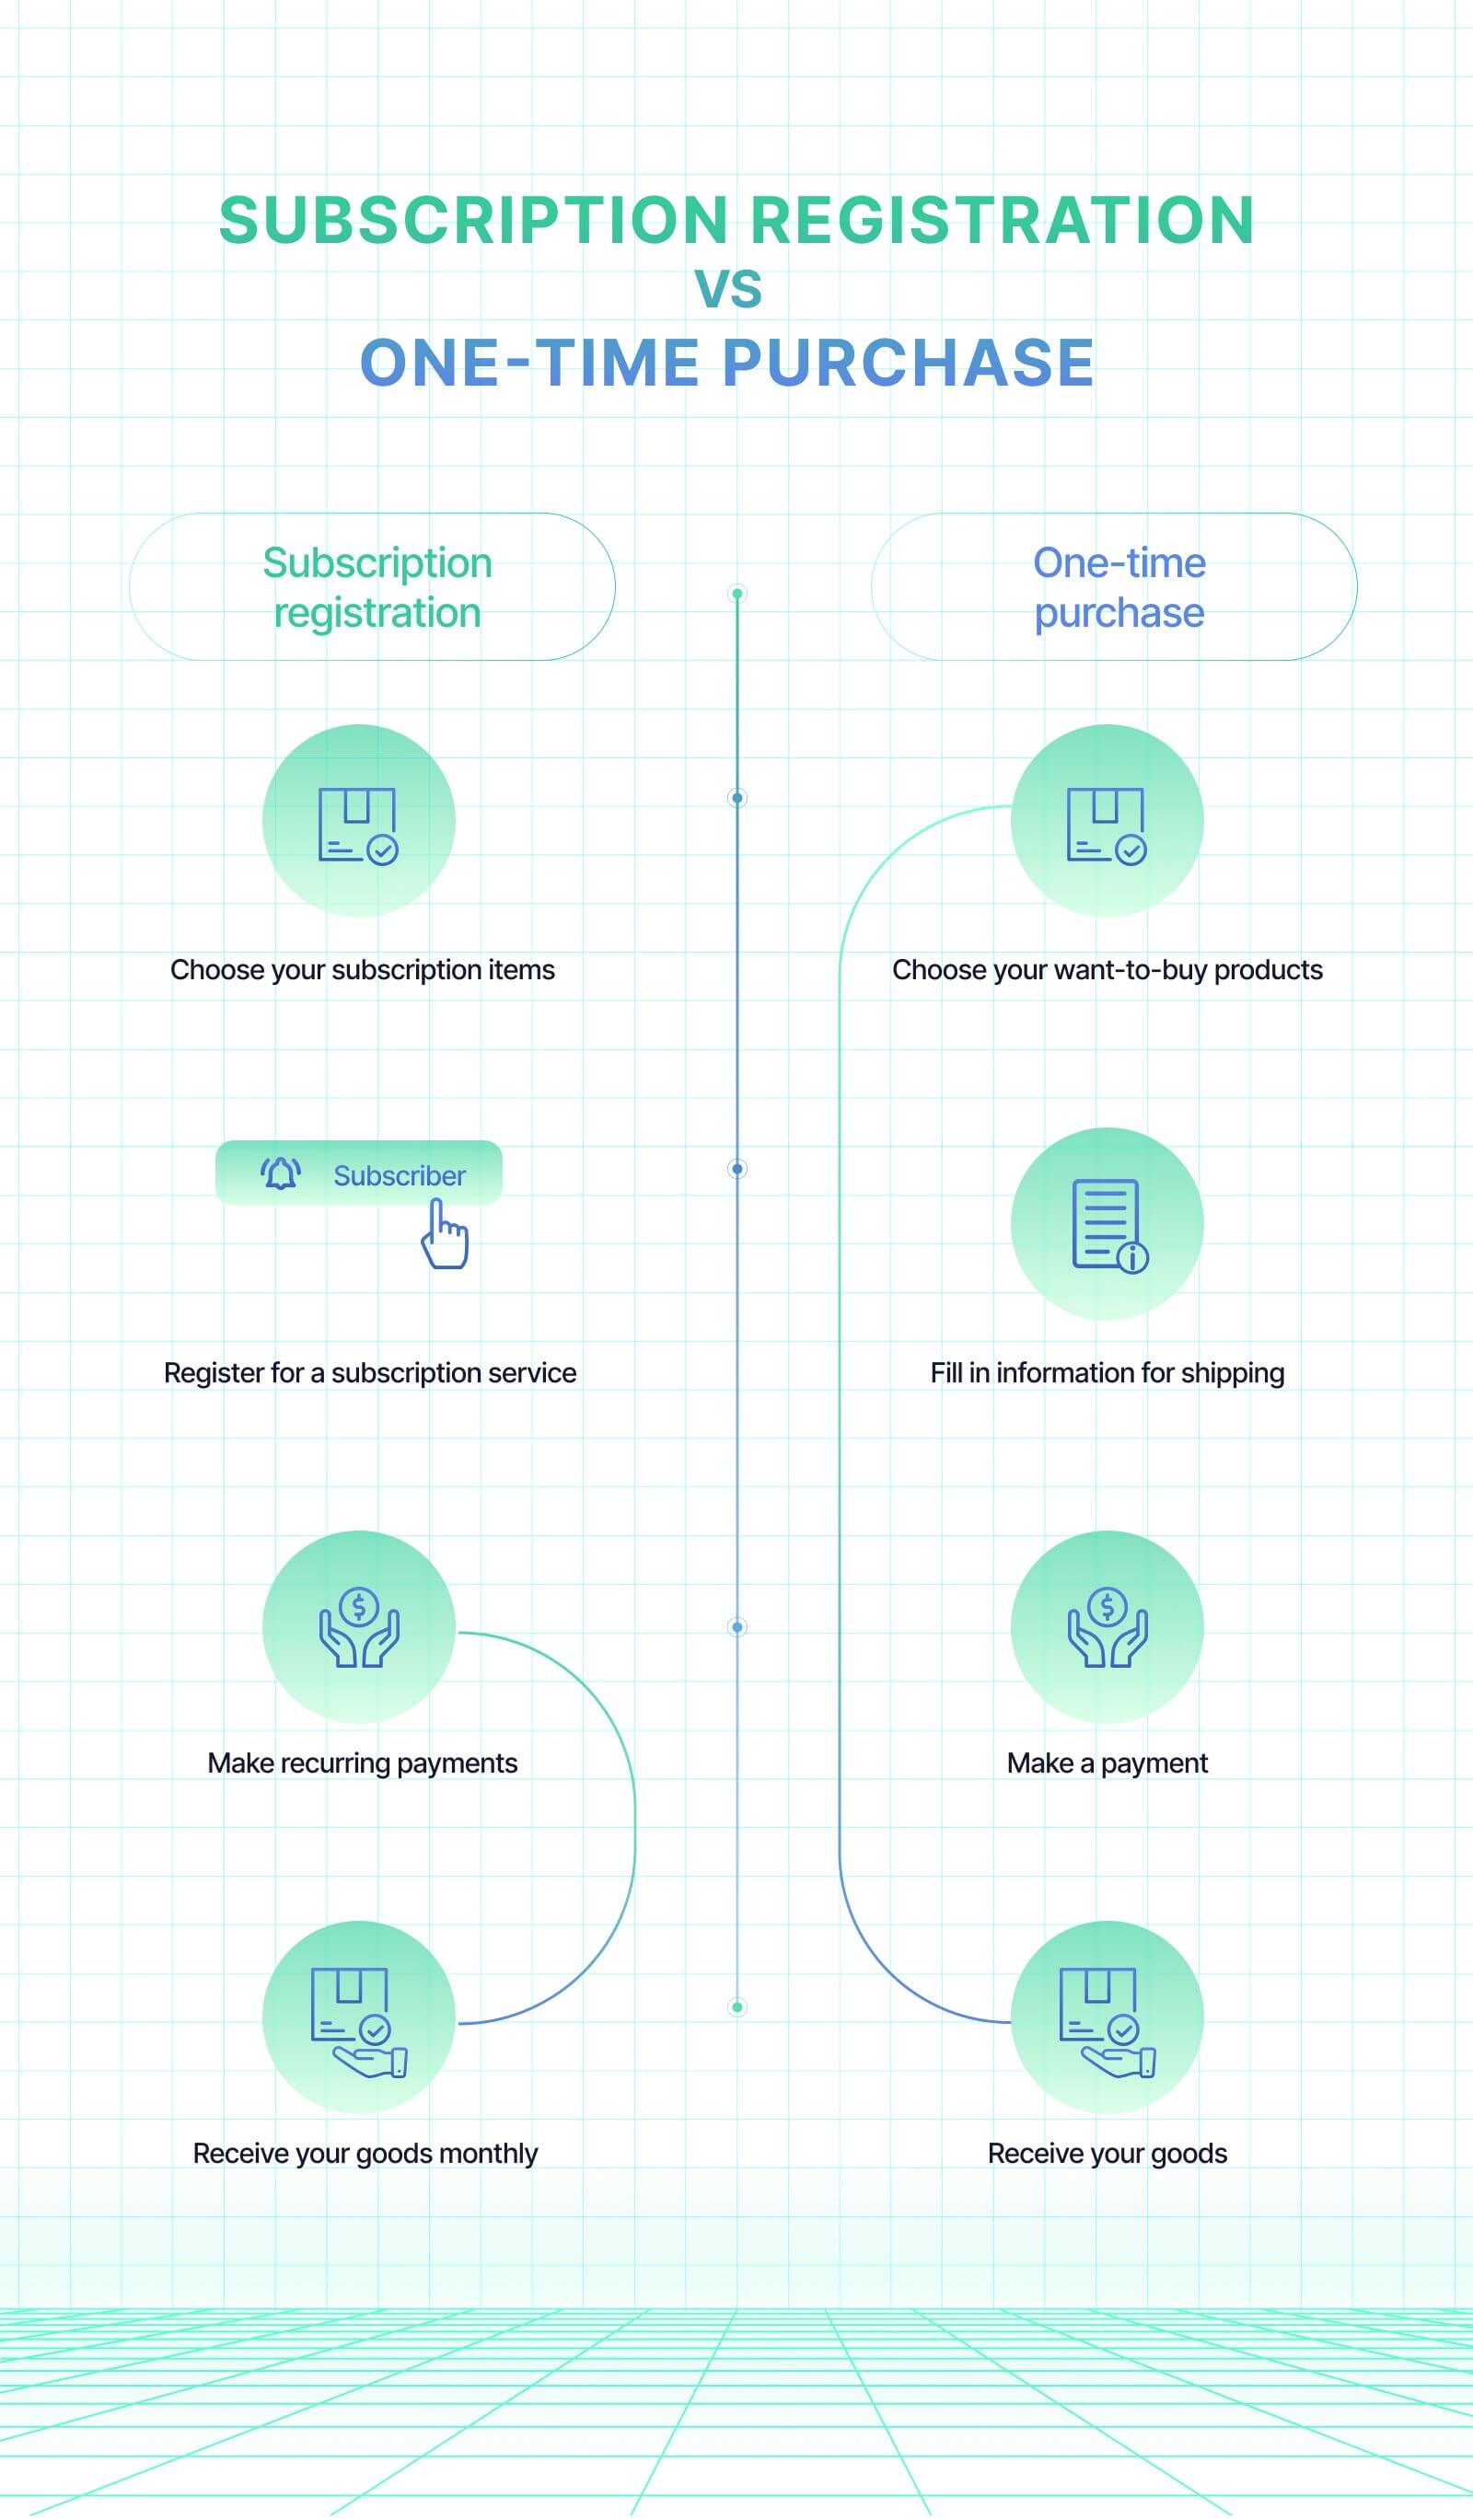 Subscription registration vs. one-time purchase